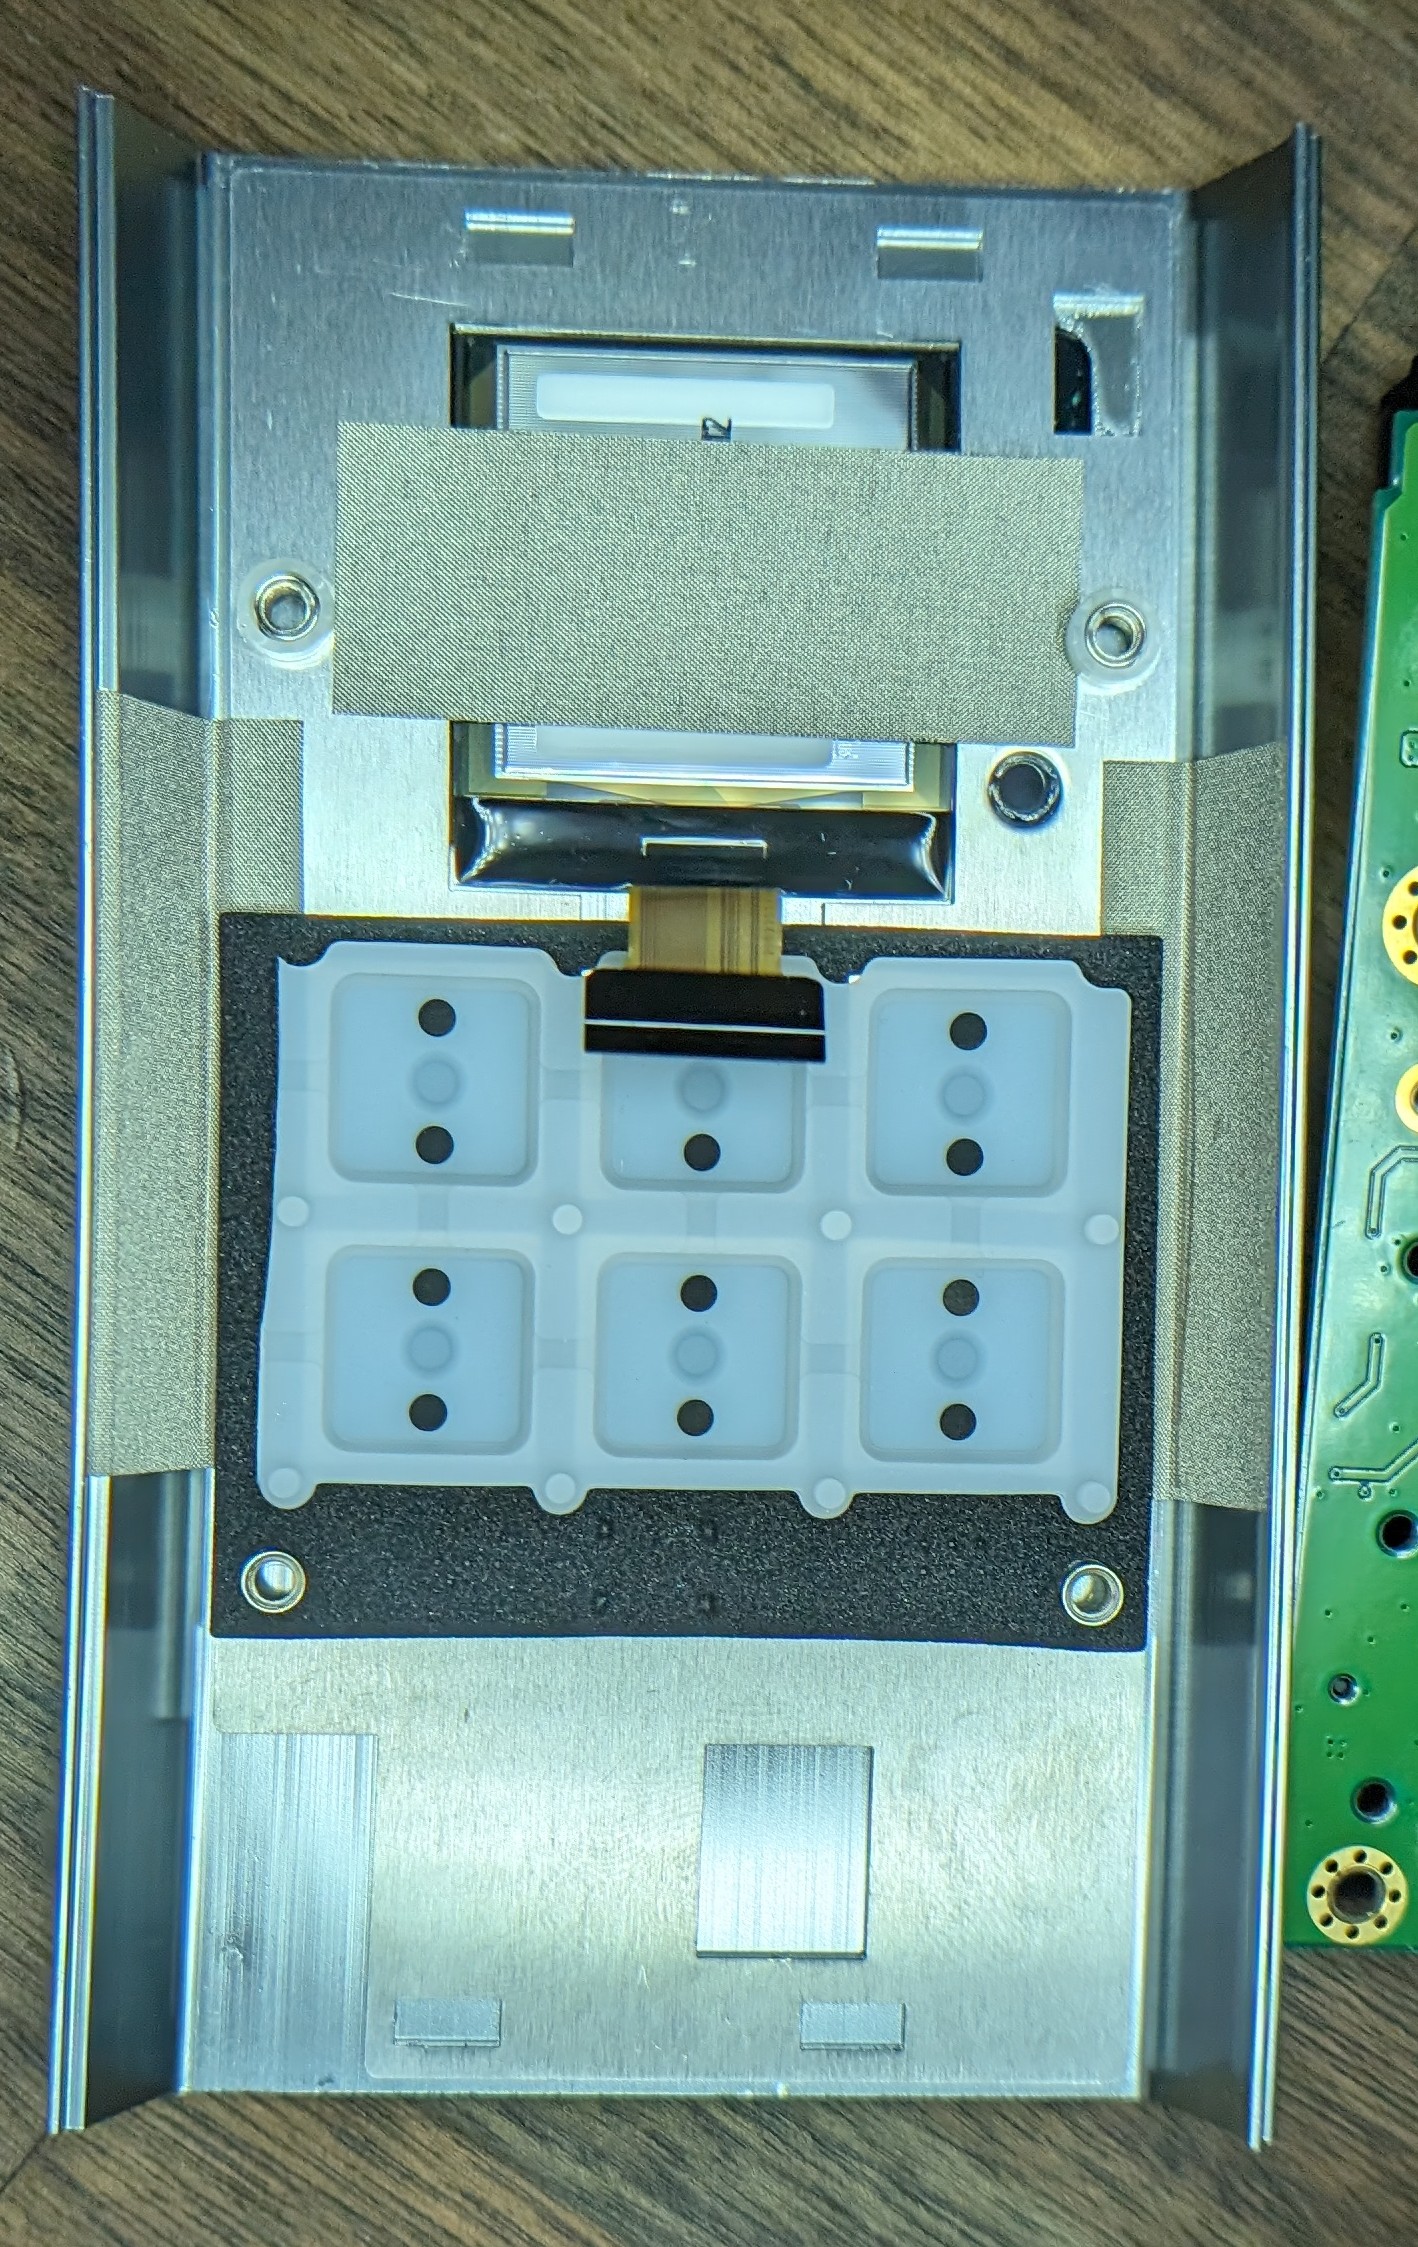 Interior of the front panel features button matrix and OLED.